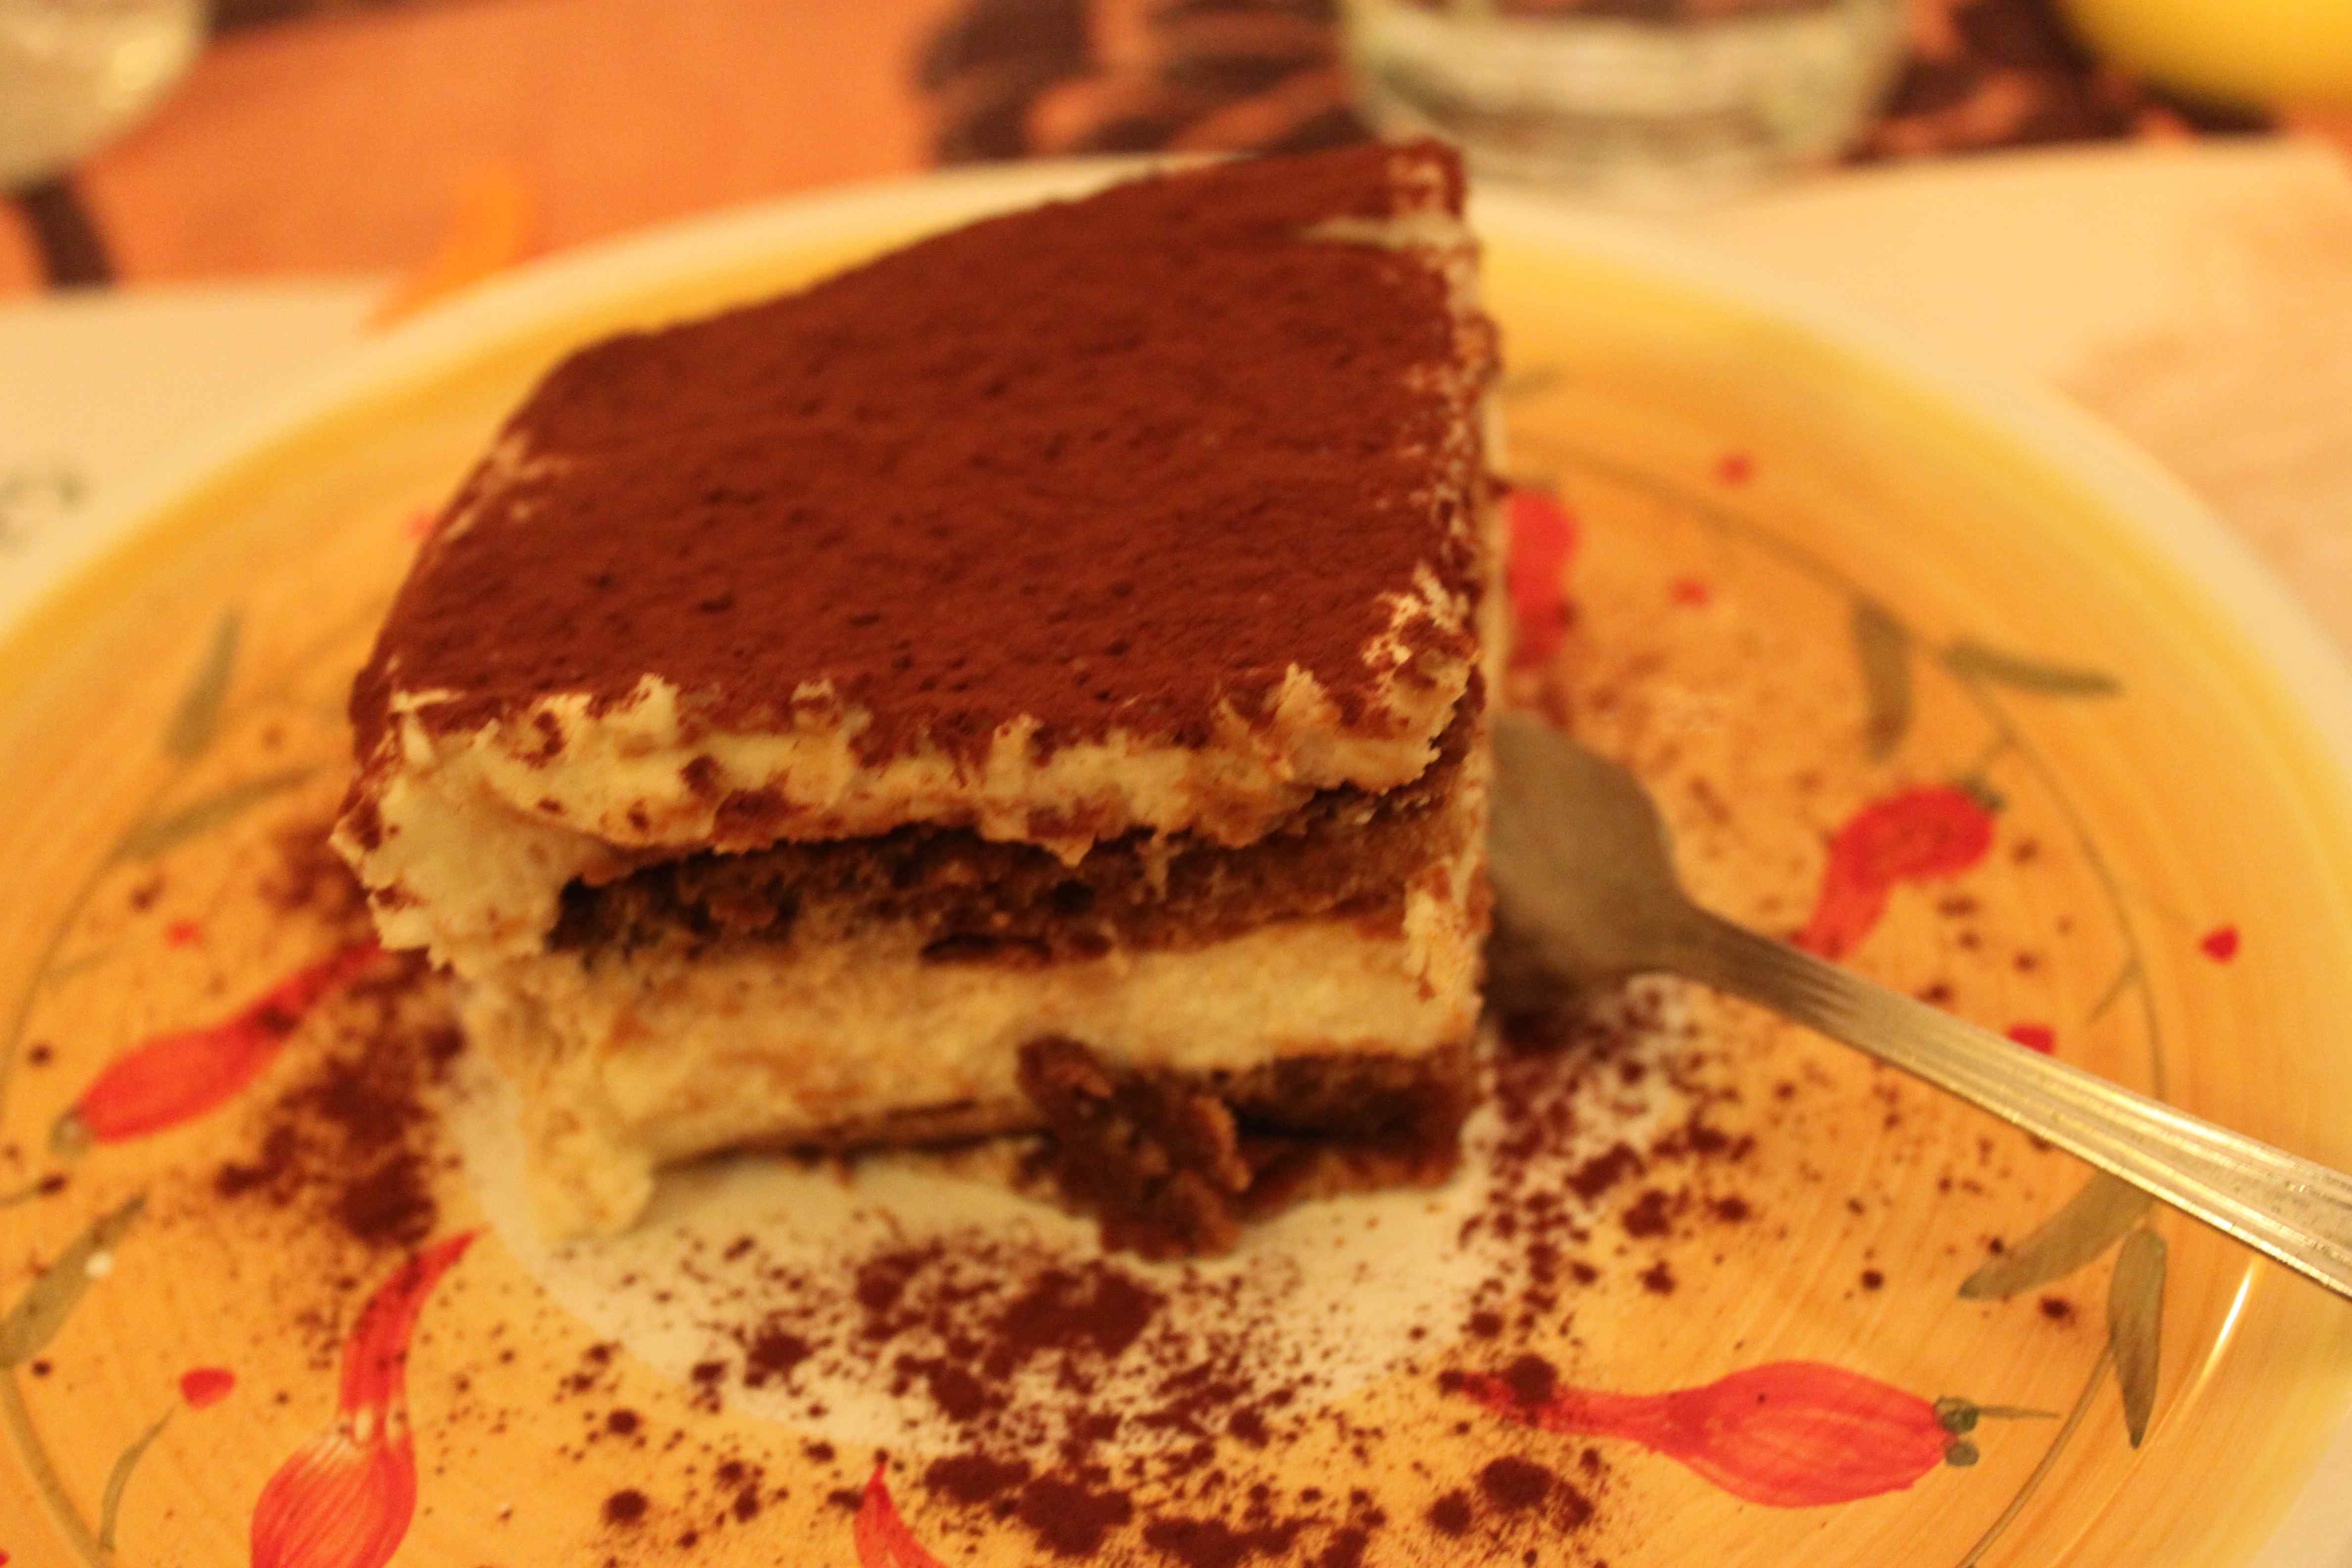 Taormina left could we chagrin  to my nearby wish  tiramisu The â€“ we I  (much next day,